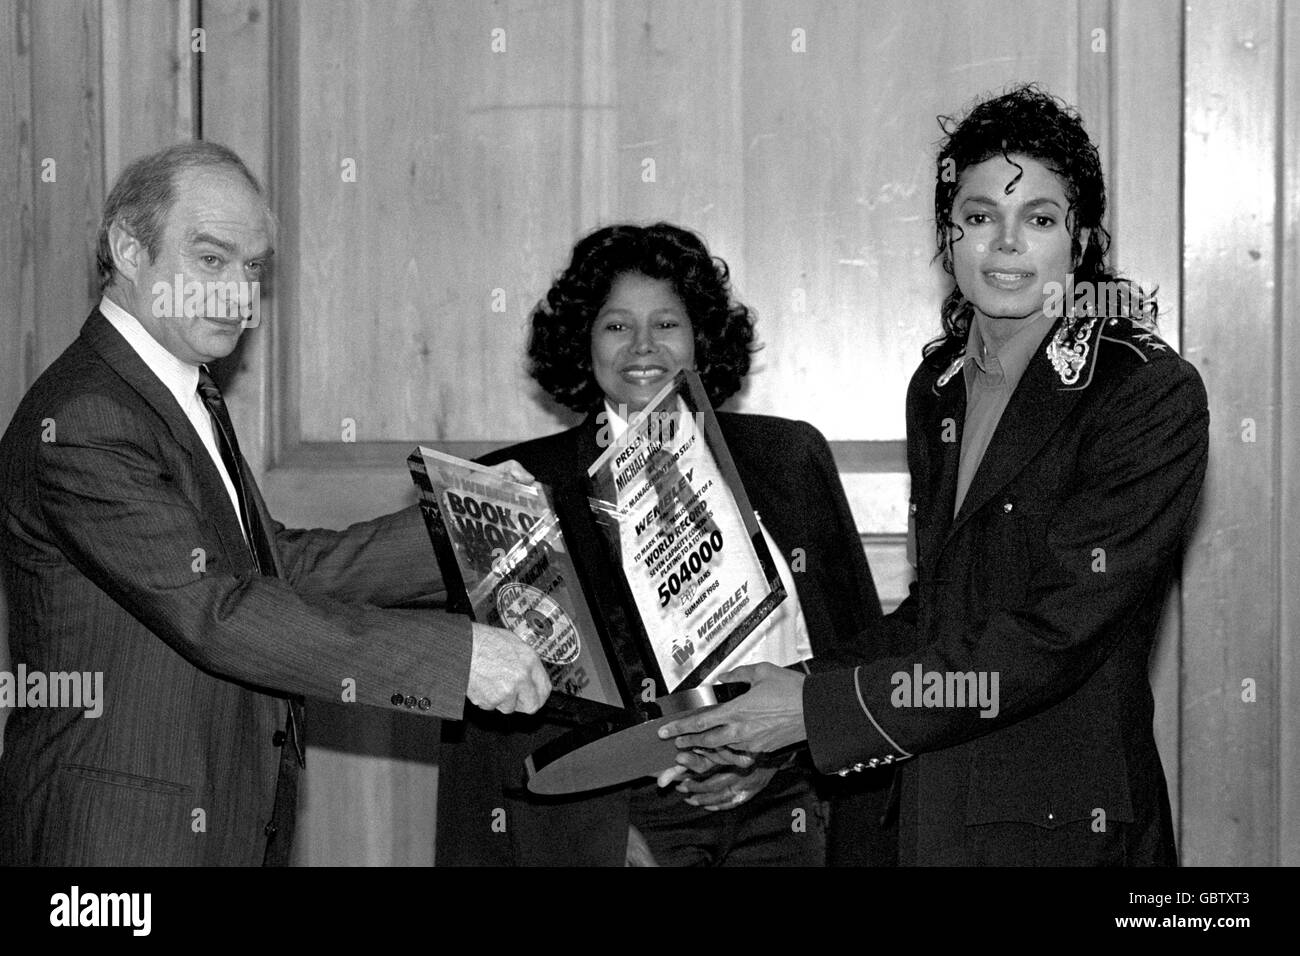 Brian Wolfson, chairman of Wembley Stadium, presents pop star Michael Jackson with a special award to mark the singer's seven sell-out shows at Wembley during his UK tour. The star's mother, Katherine Jackson, watches the presentation at London's Mayfair Hotel. Stock Photo